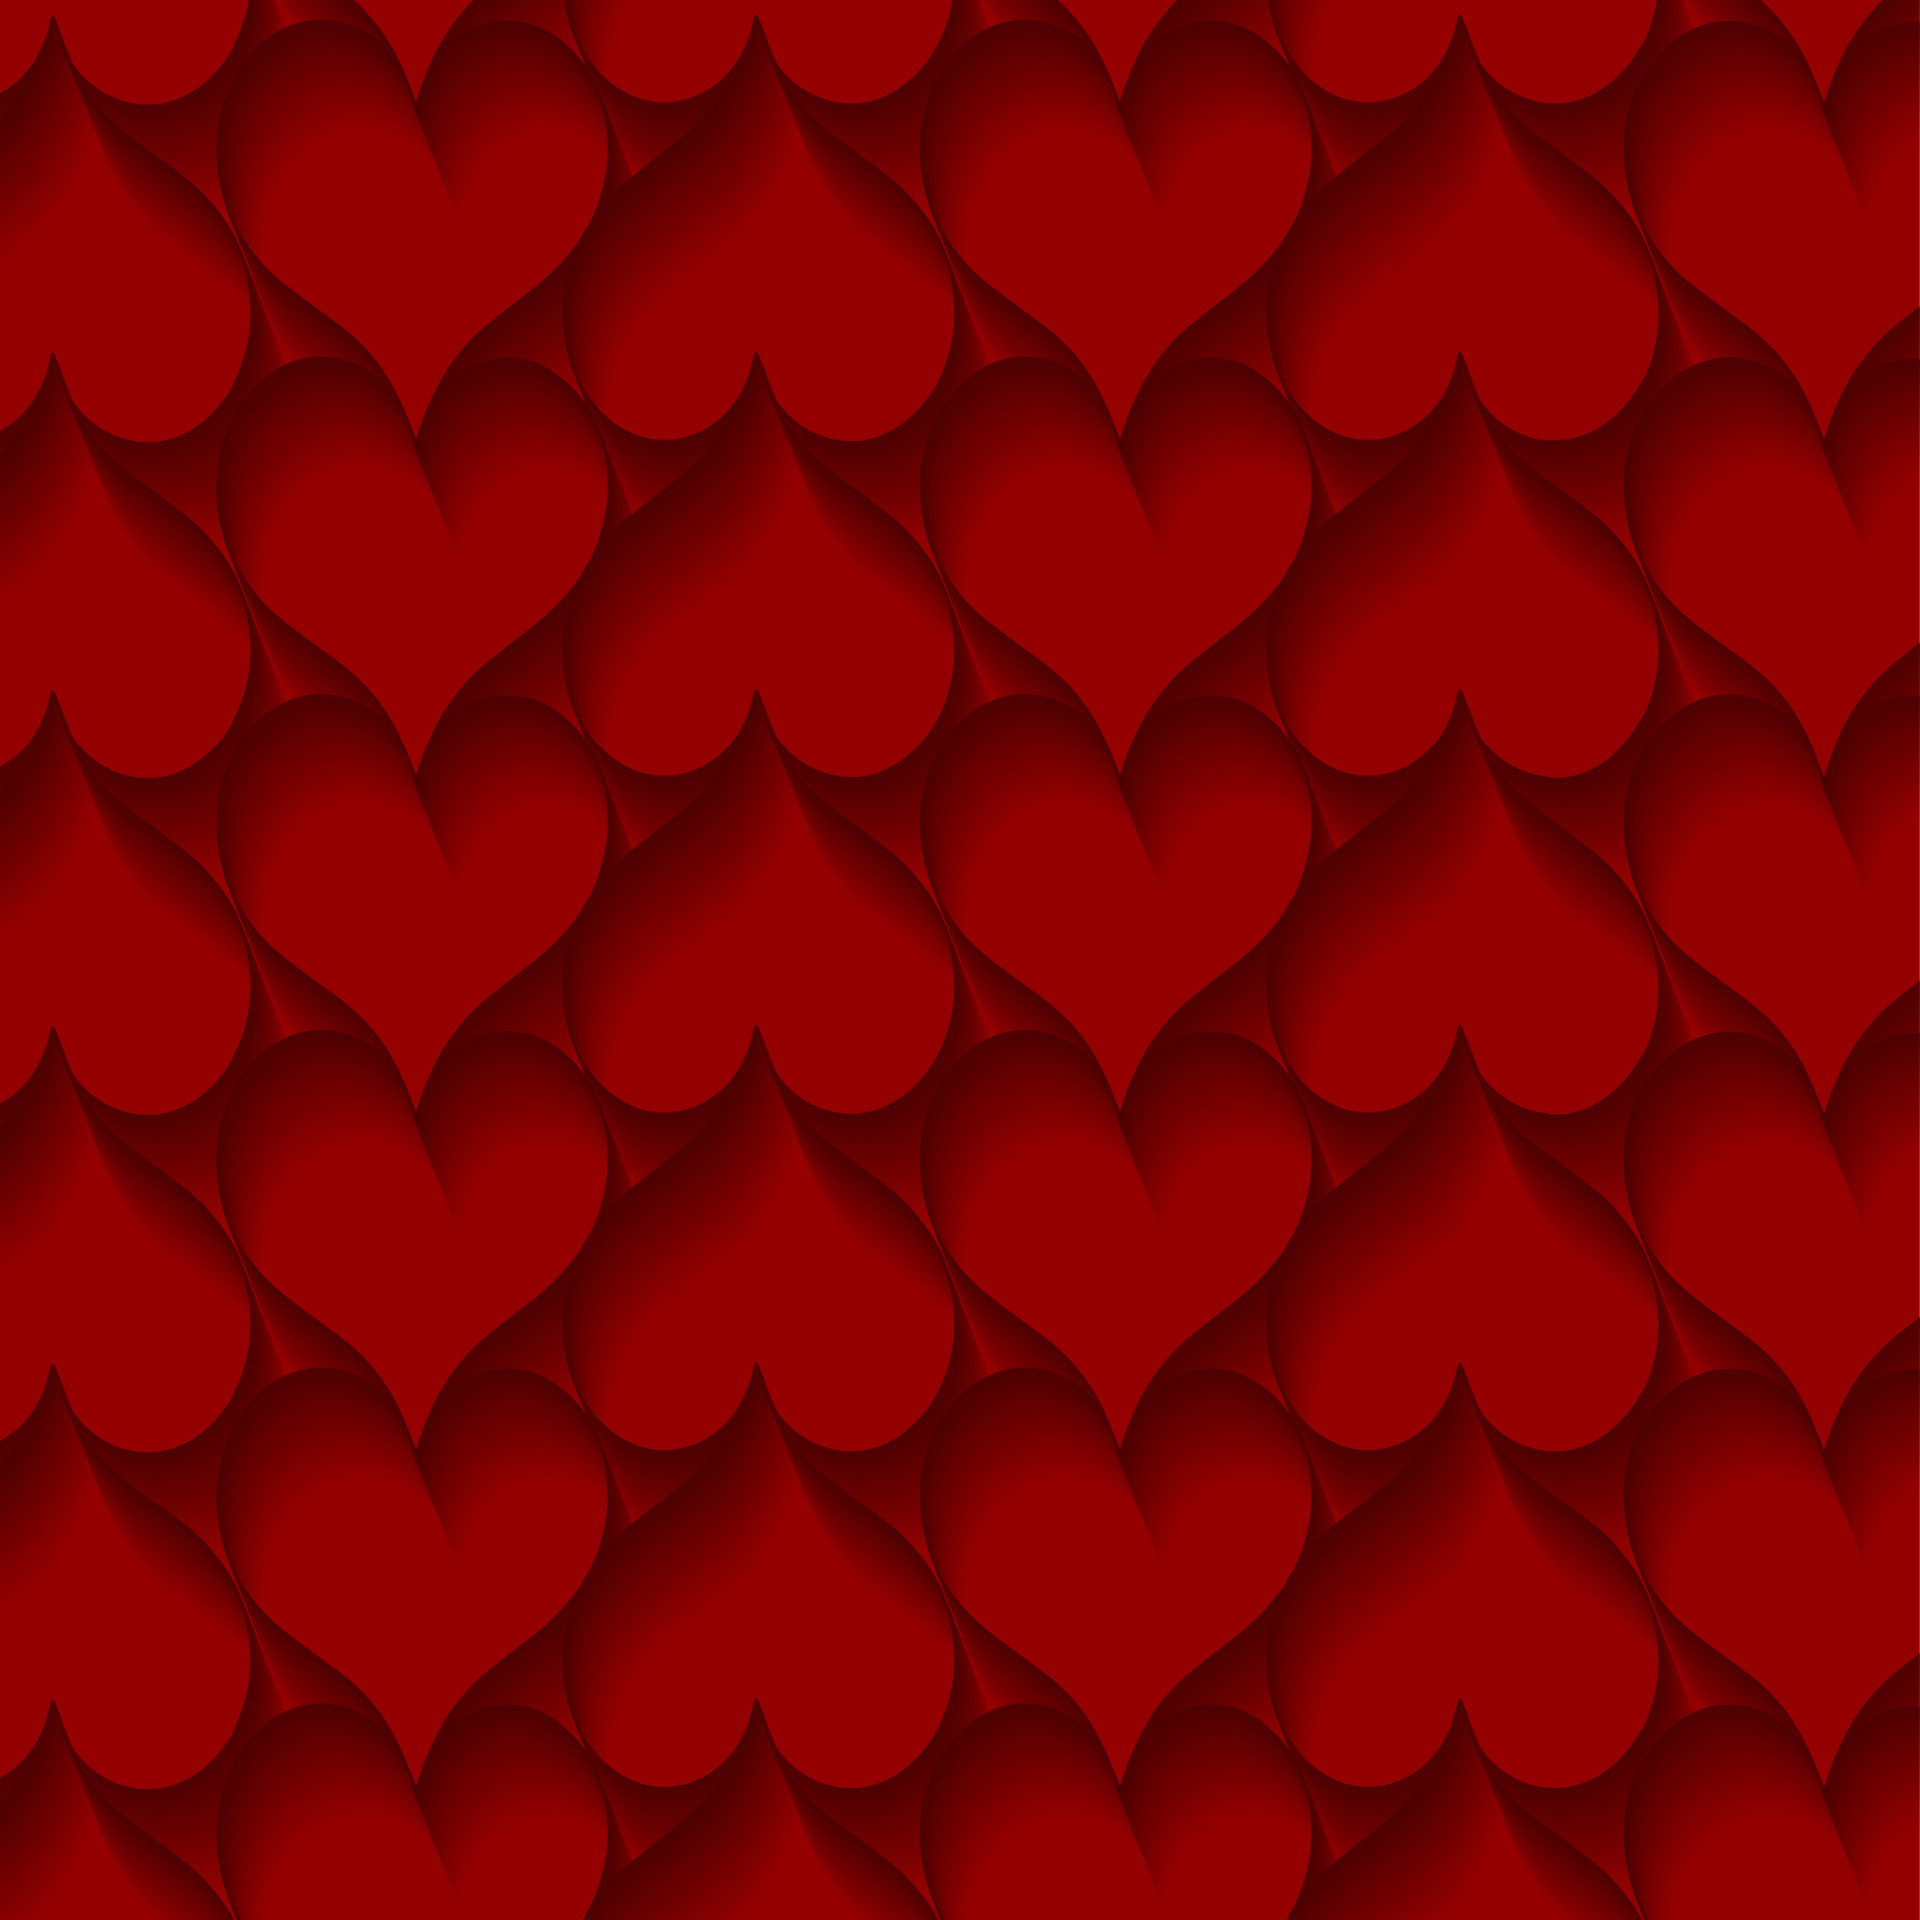 Hearts texture image